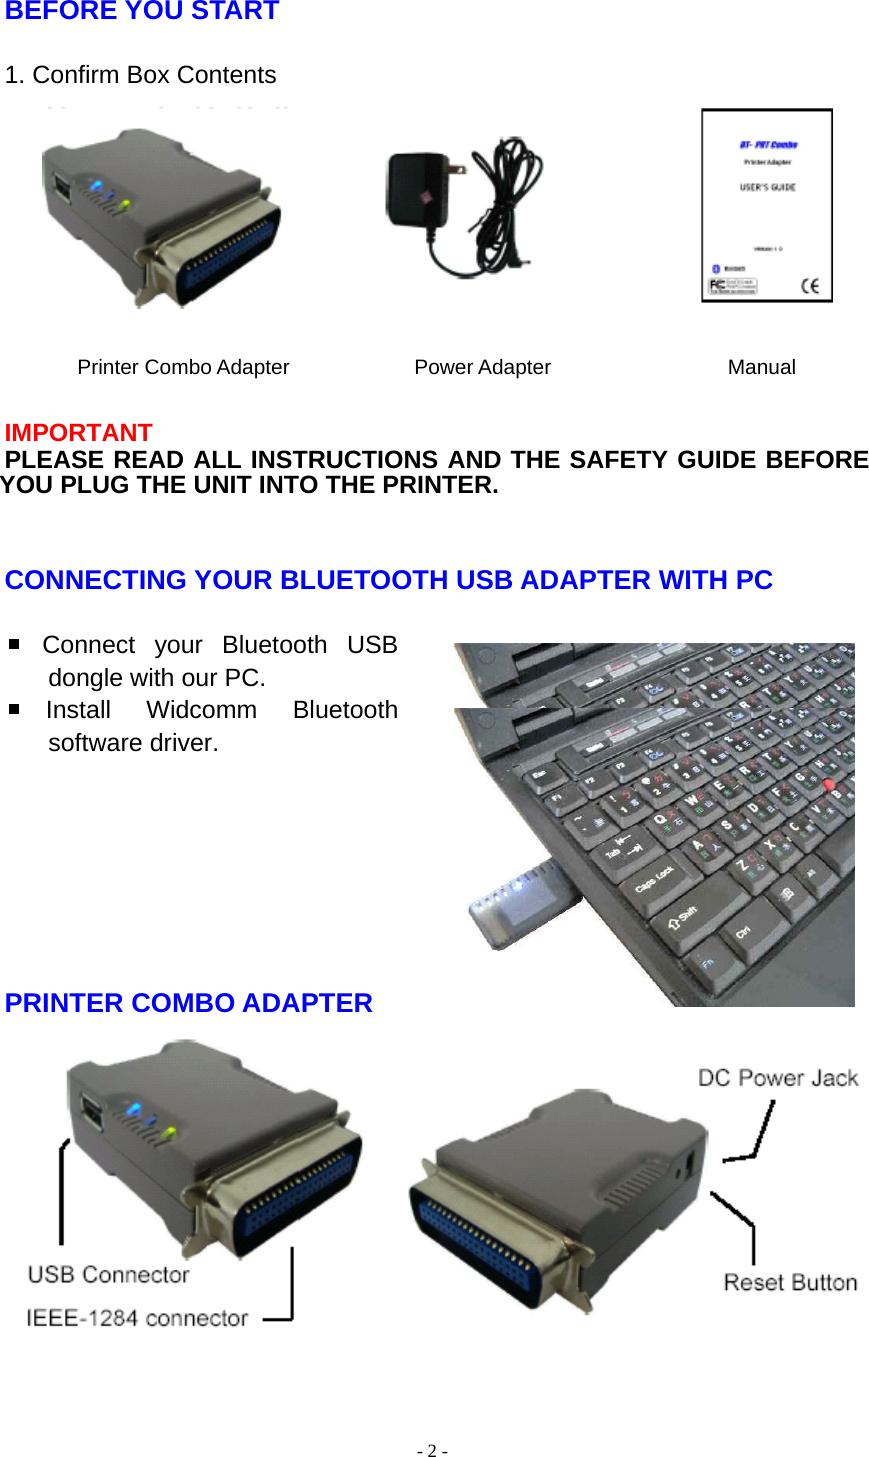  - 2 - BEFORE YOU START  1. Confirm Box Contents         Printer Combo Adapter            Power Adapter                 Manual  IMPORTANT PLEASE READ ALL INSTRUCTIONS AND THE SAFETY GUIDE BEFORE YOU PLUG THE UNIT INTO THE PRINTER.   CONNECTING YOUR BLUETOOTH USB ADAPTER WITH PC   Connect your Bluetooth USB dongle with our PC. Install Widcomm Bluetooth software driver.        PRINTER COMBO ADAPTER             